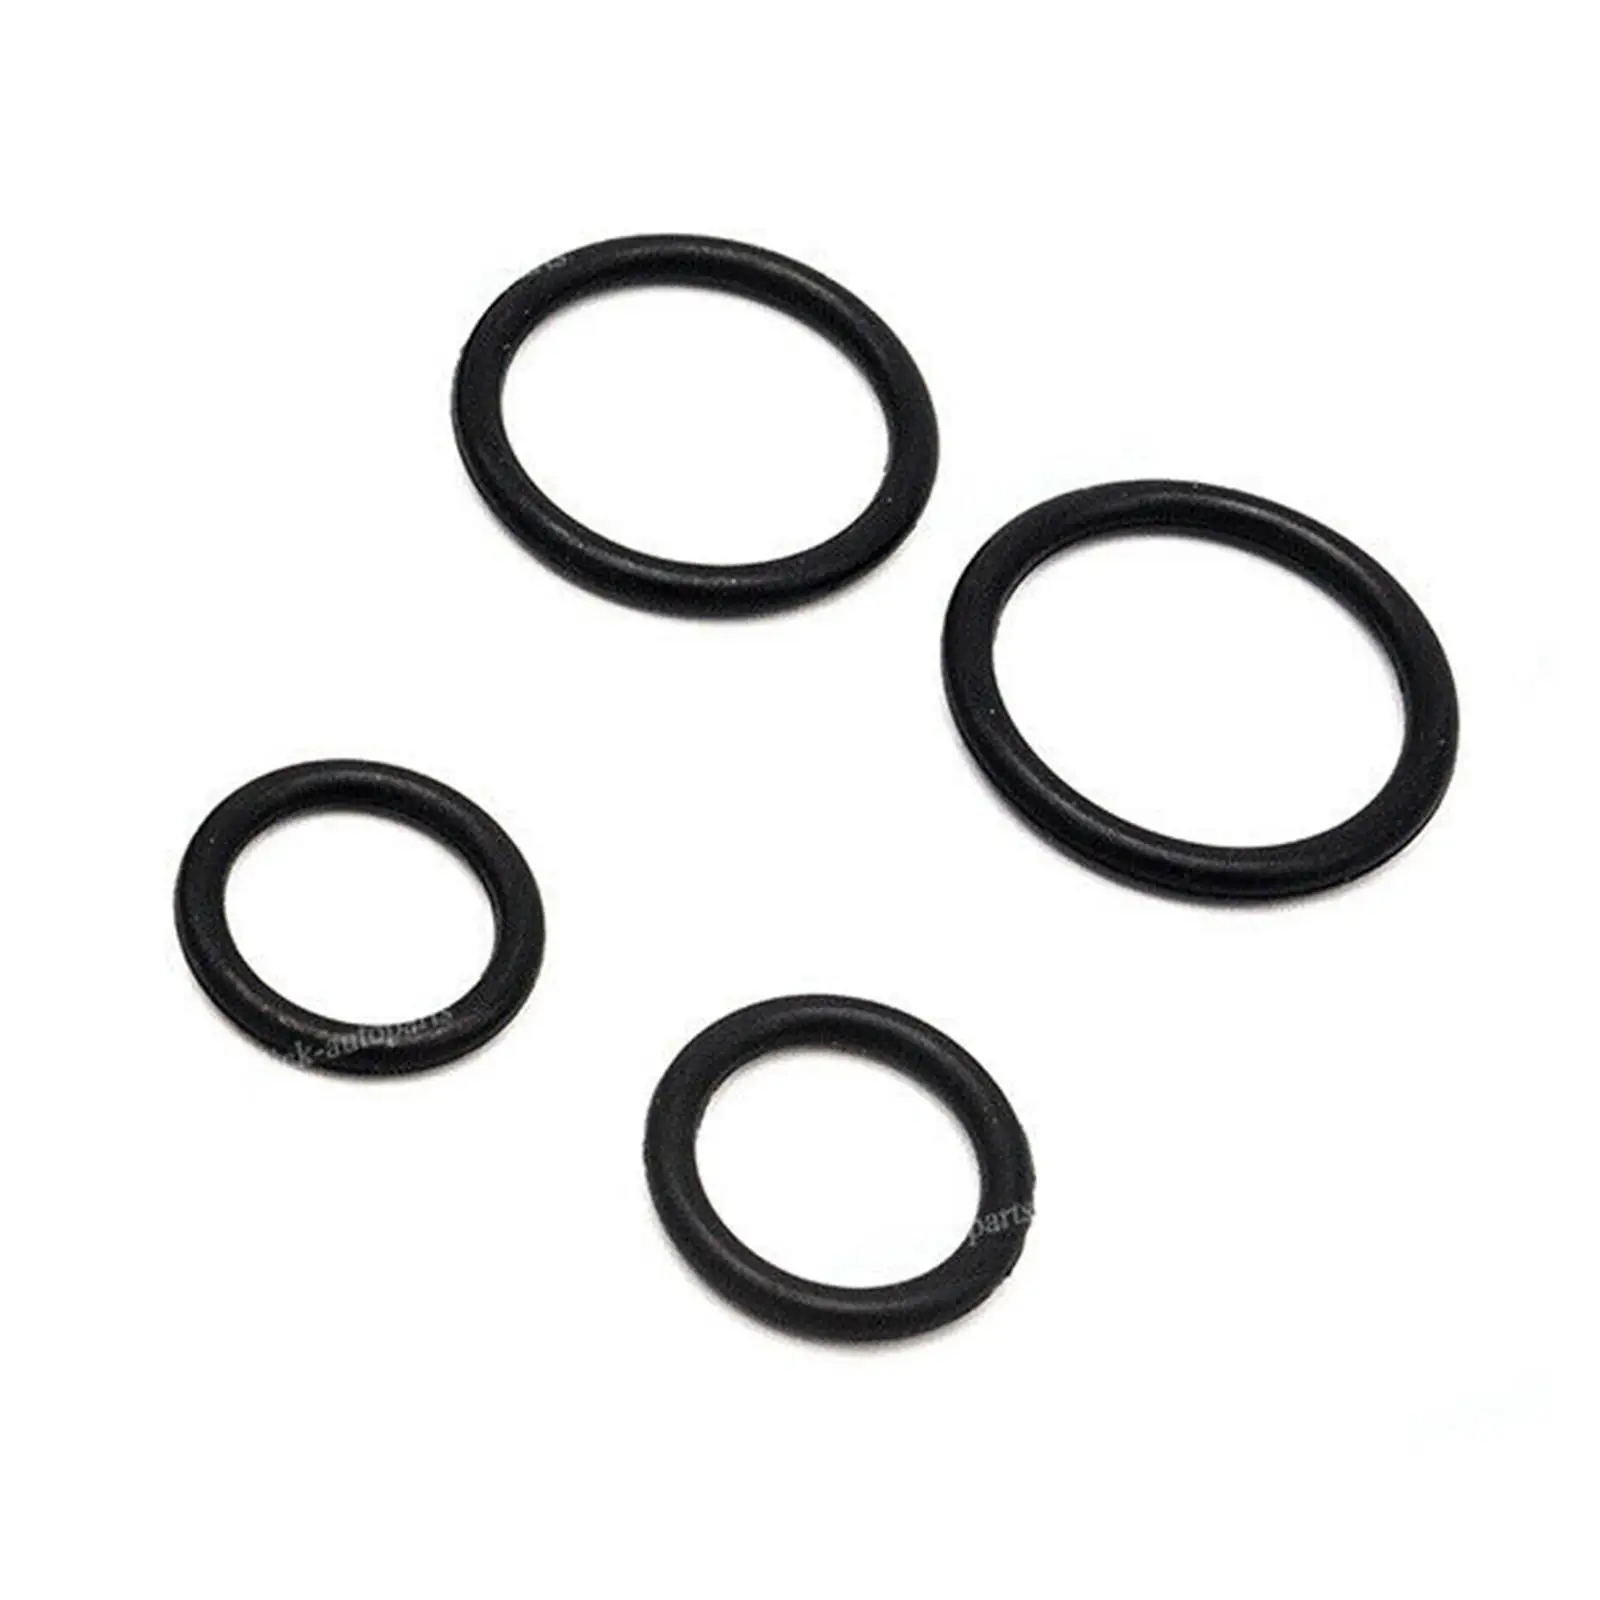 15Pcs Engine Oil Cooler Gasket Seal Suit 55354071 Gasket Set Fit for Chevy Aveo Aveo5 2009-2011 Cruze Oil Radiator Repair Kit